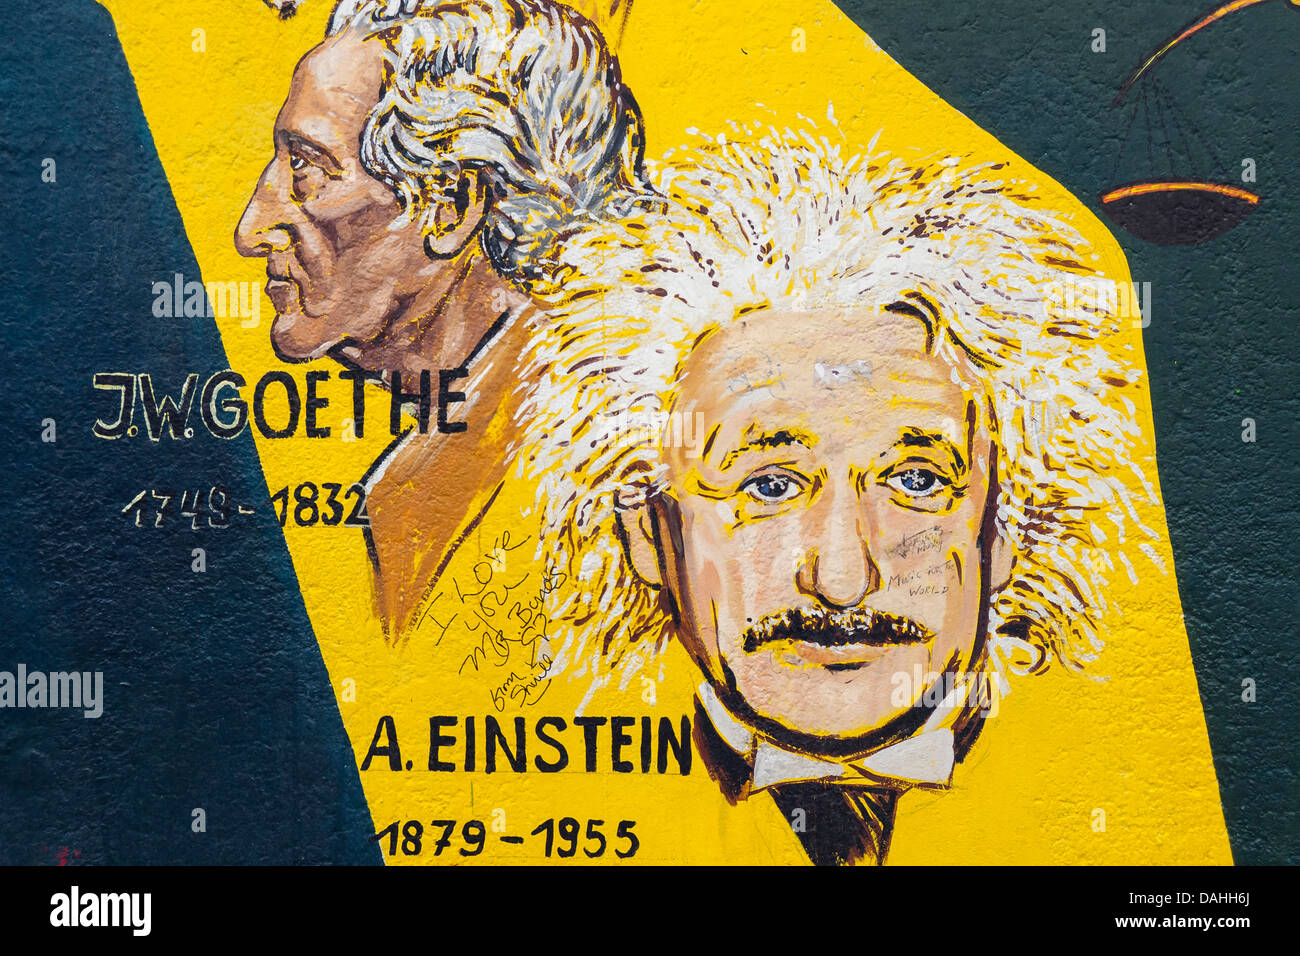 Justitia painting with Portraits of Einstein and Goethe by Klaus Niethardt, East Side Gallery, Berlin Wall, Germany Stock Photo